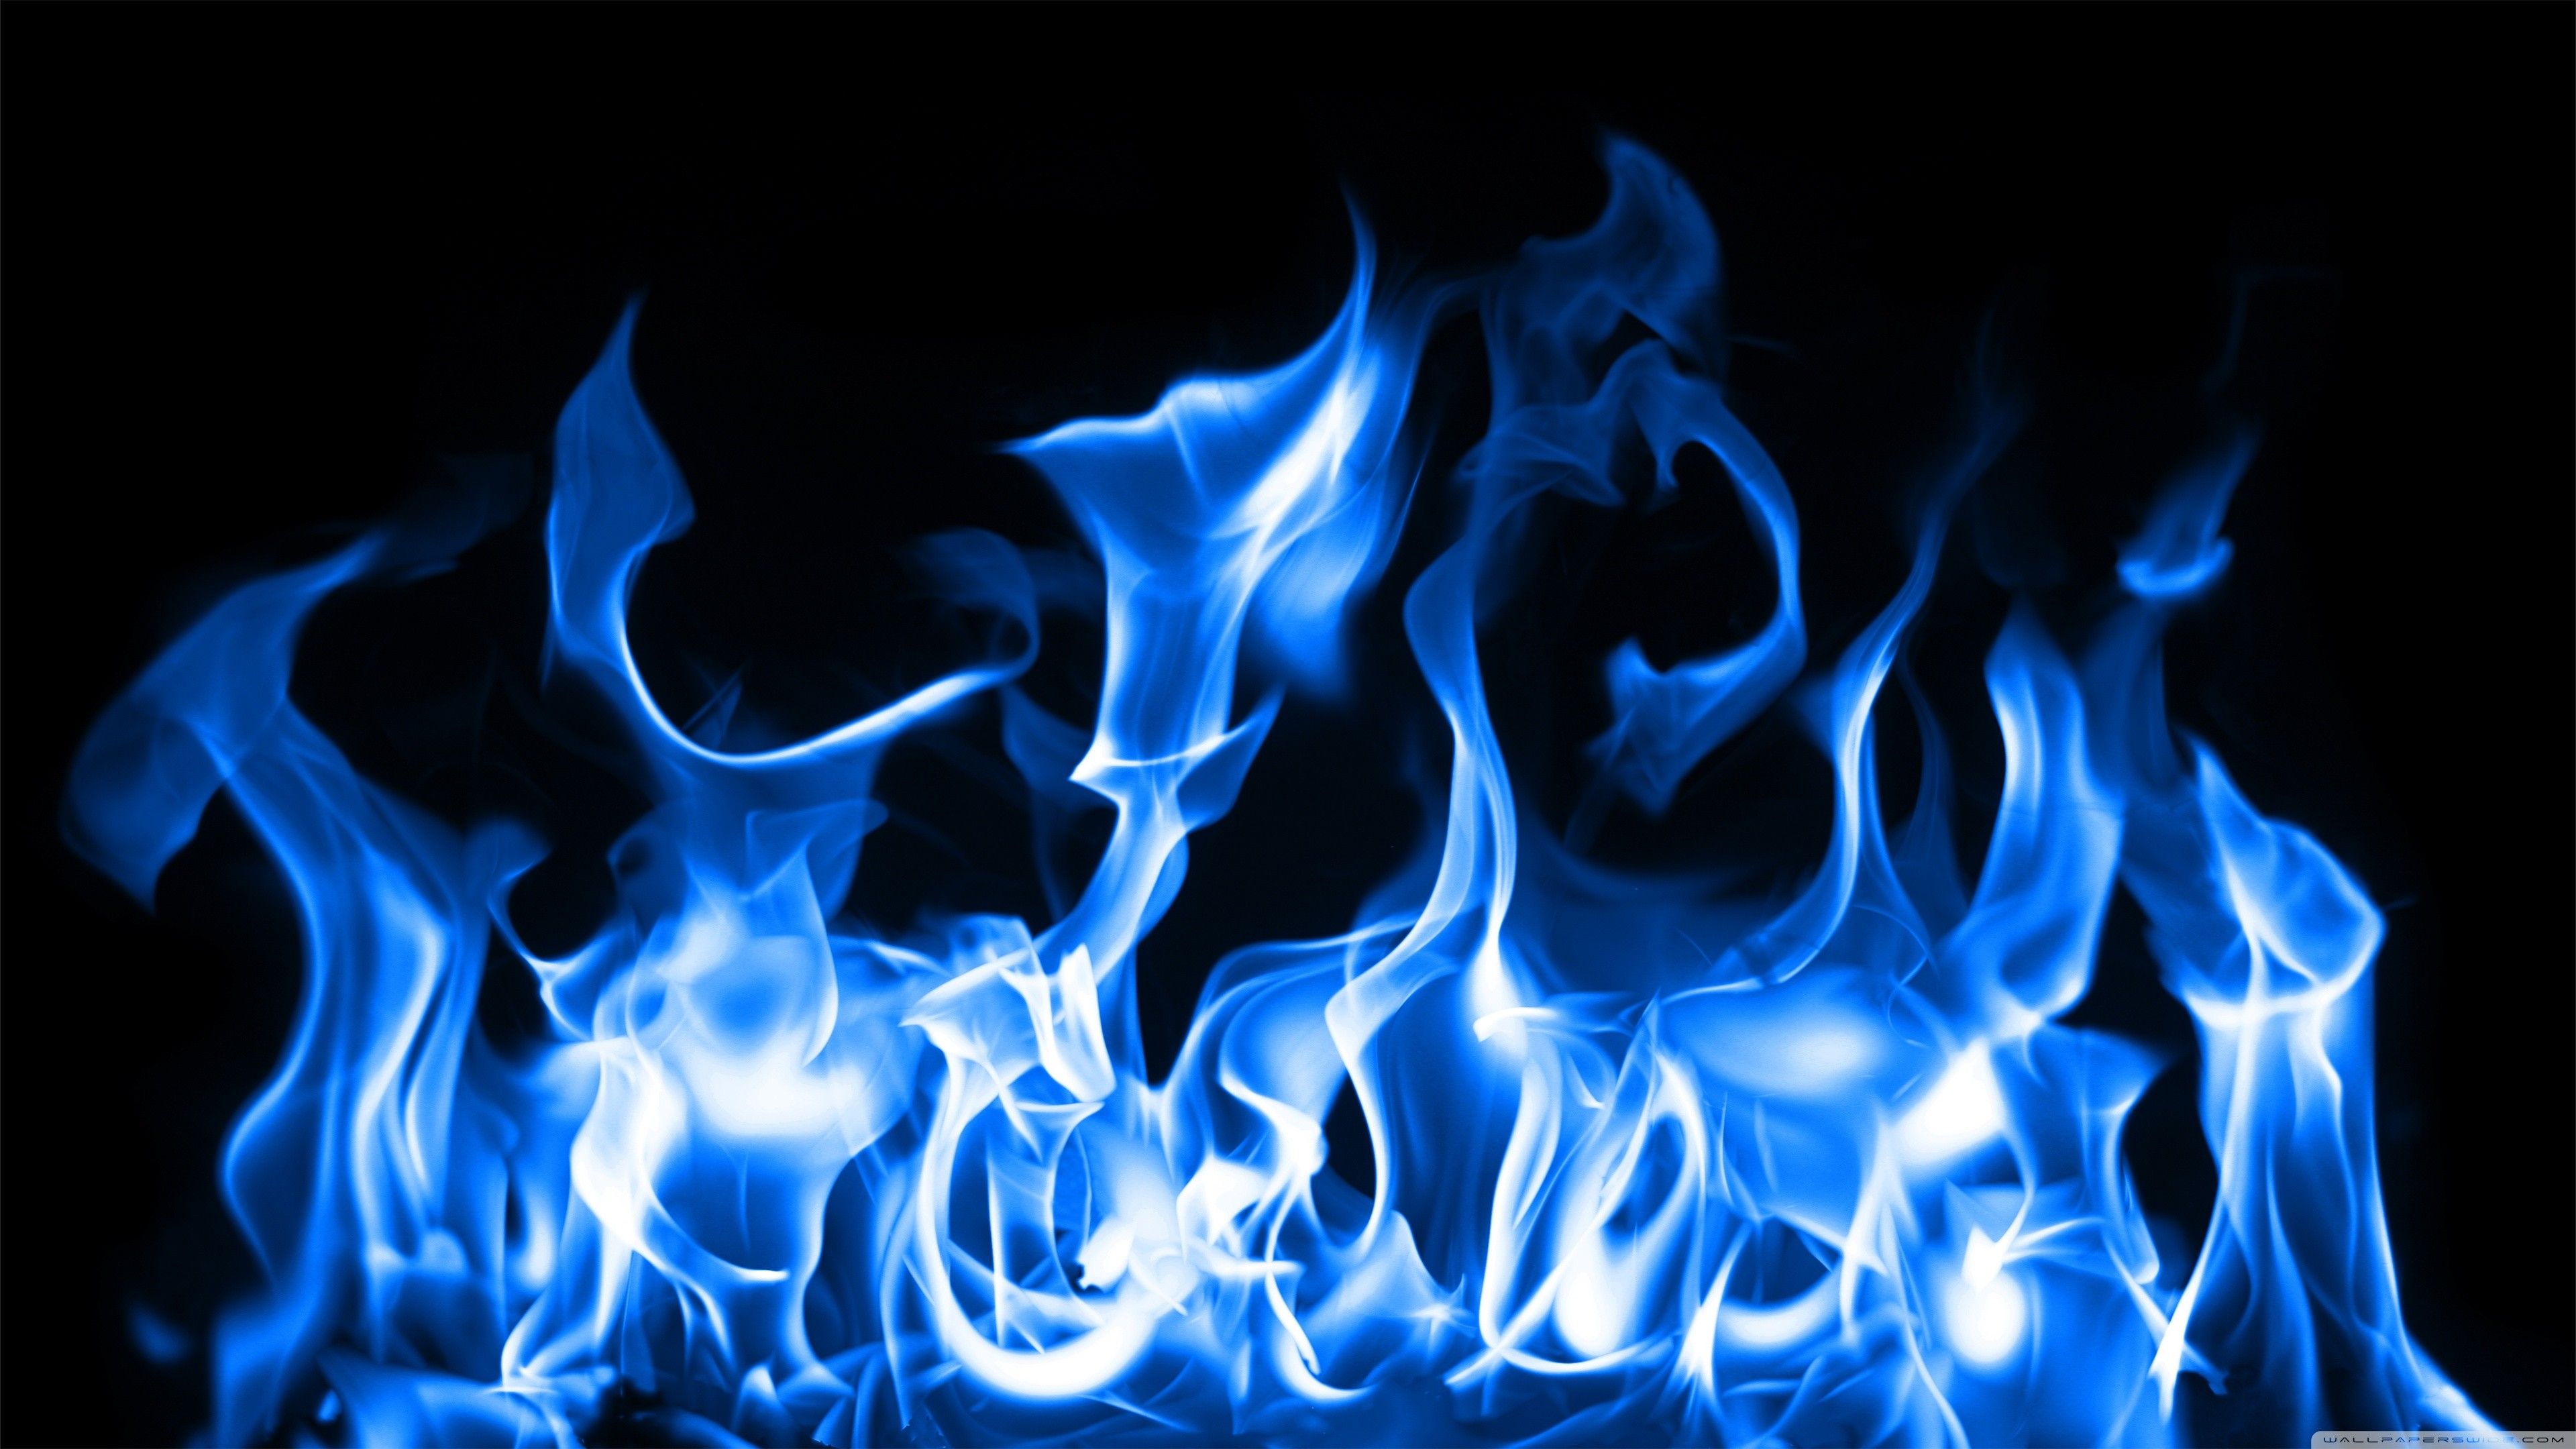 Blue Fire Wallpaper 64 pictures